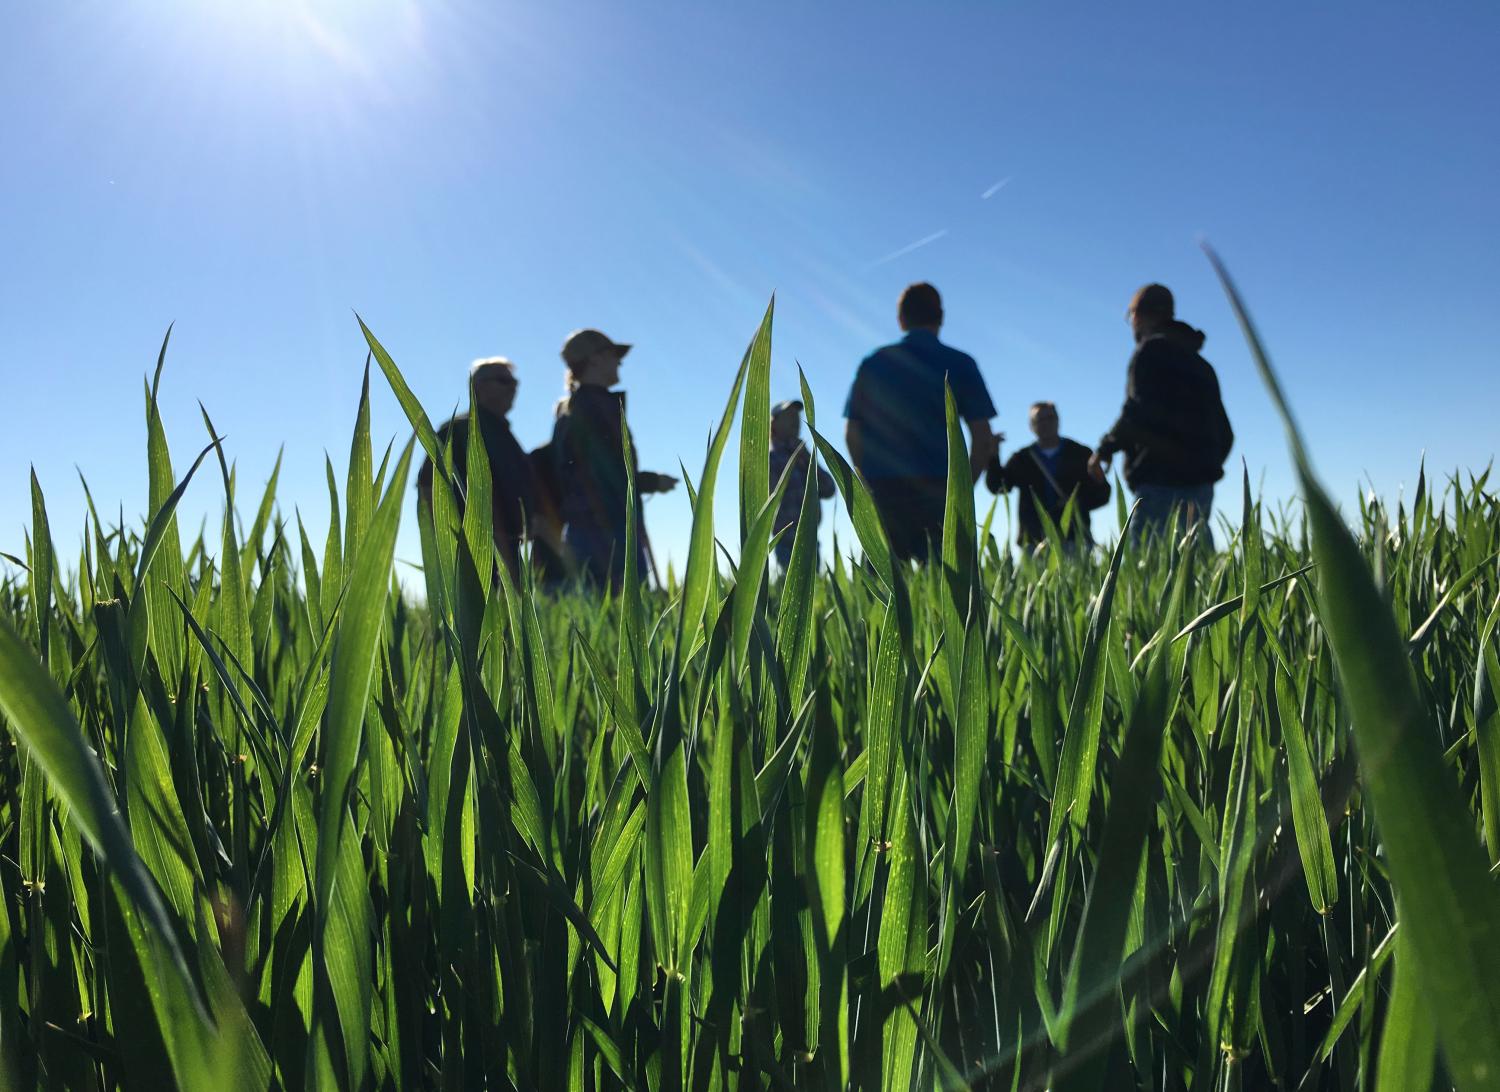 Crop scouts and grain buyers survey a wheat field in Leoni, Kansas, May 4, 2016. Picture taken May 4, 2016. REUTERS/Karl Plume - RTX2D0OB